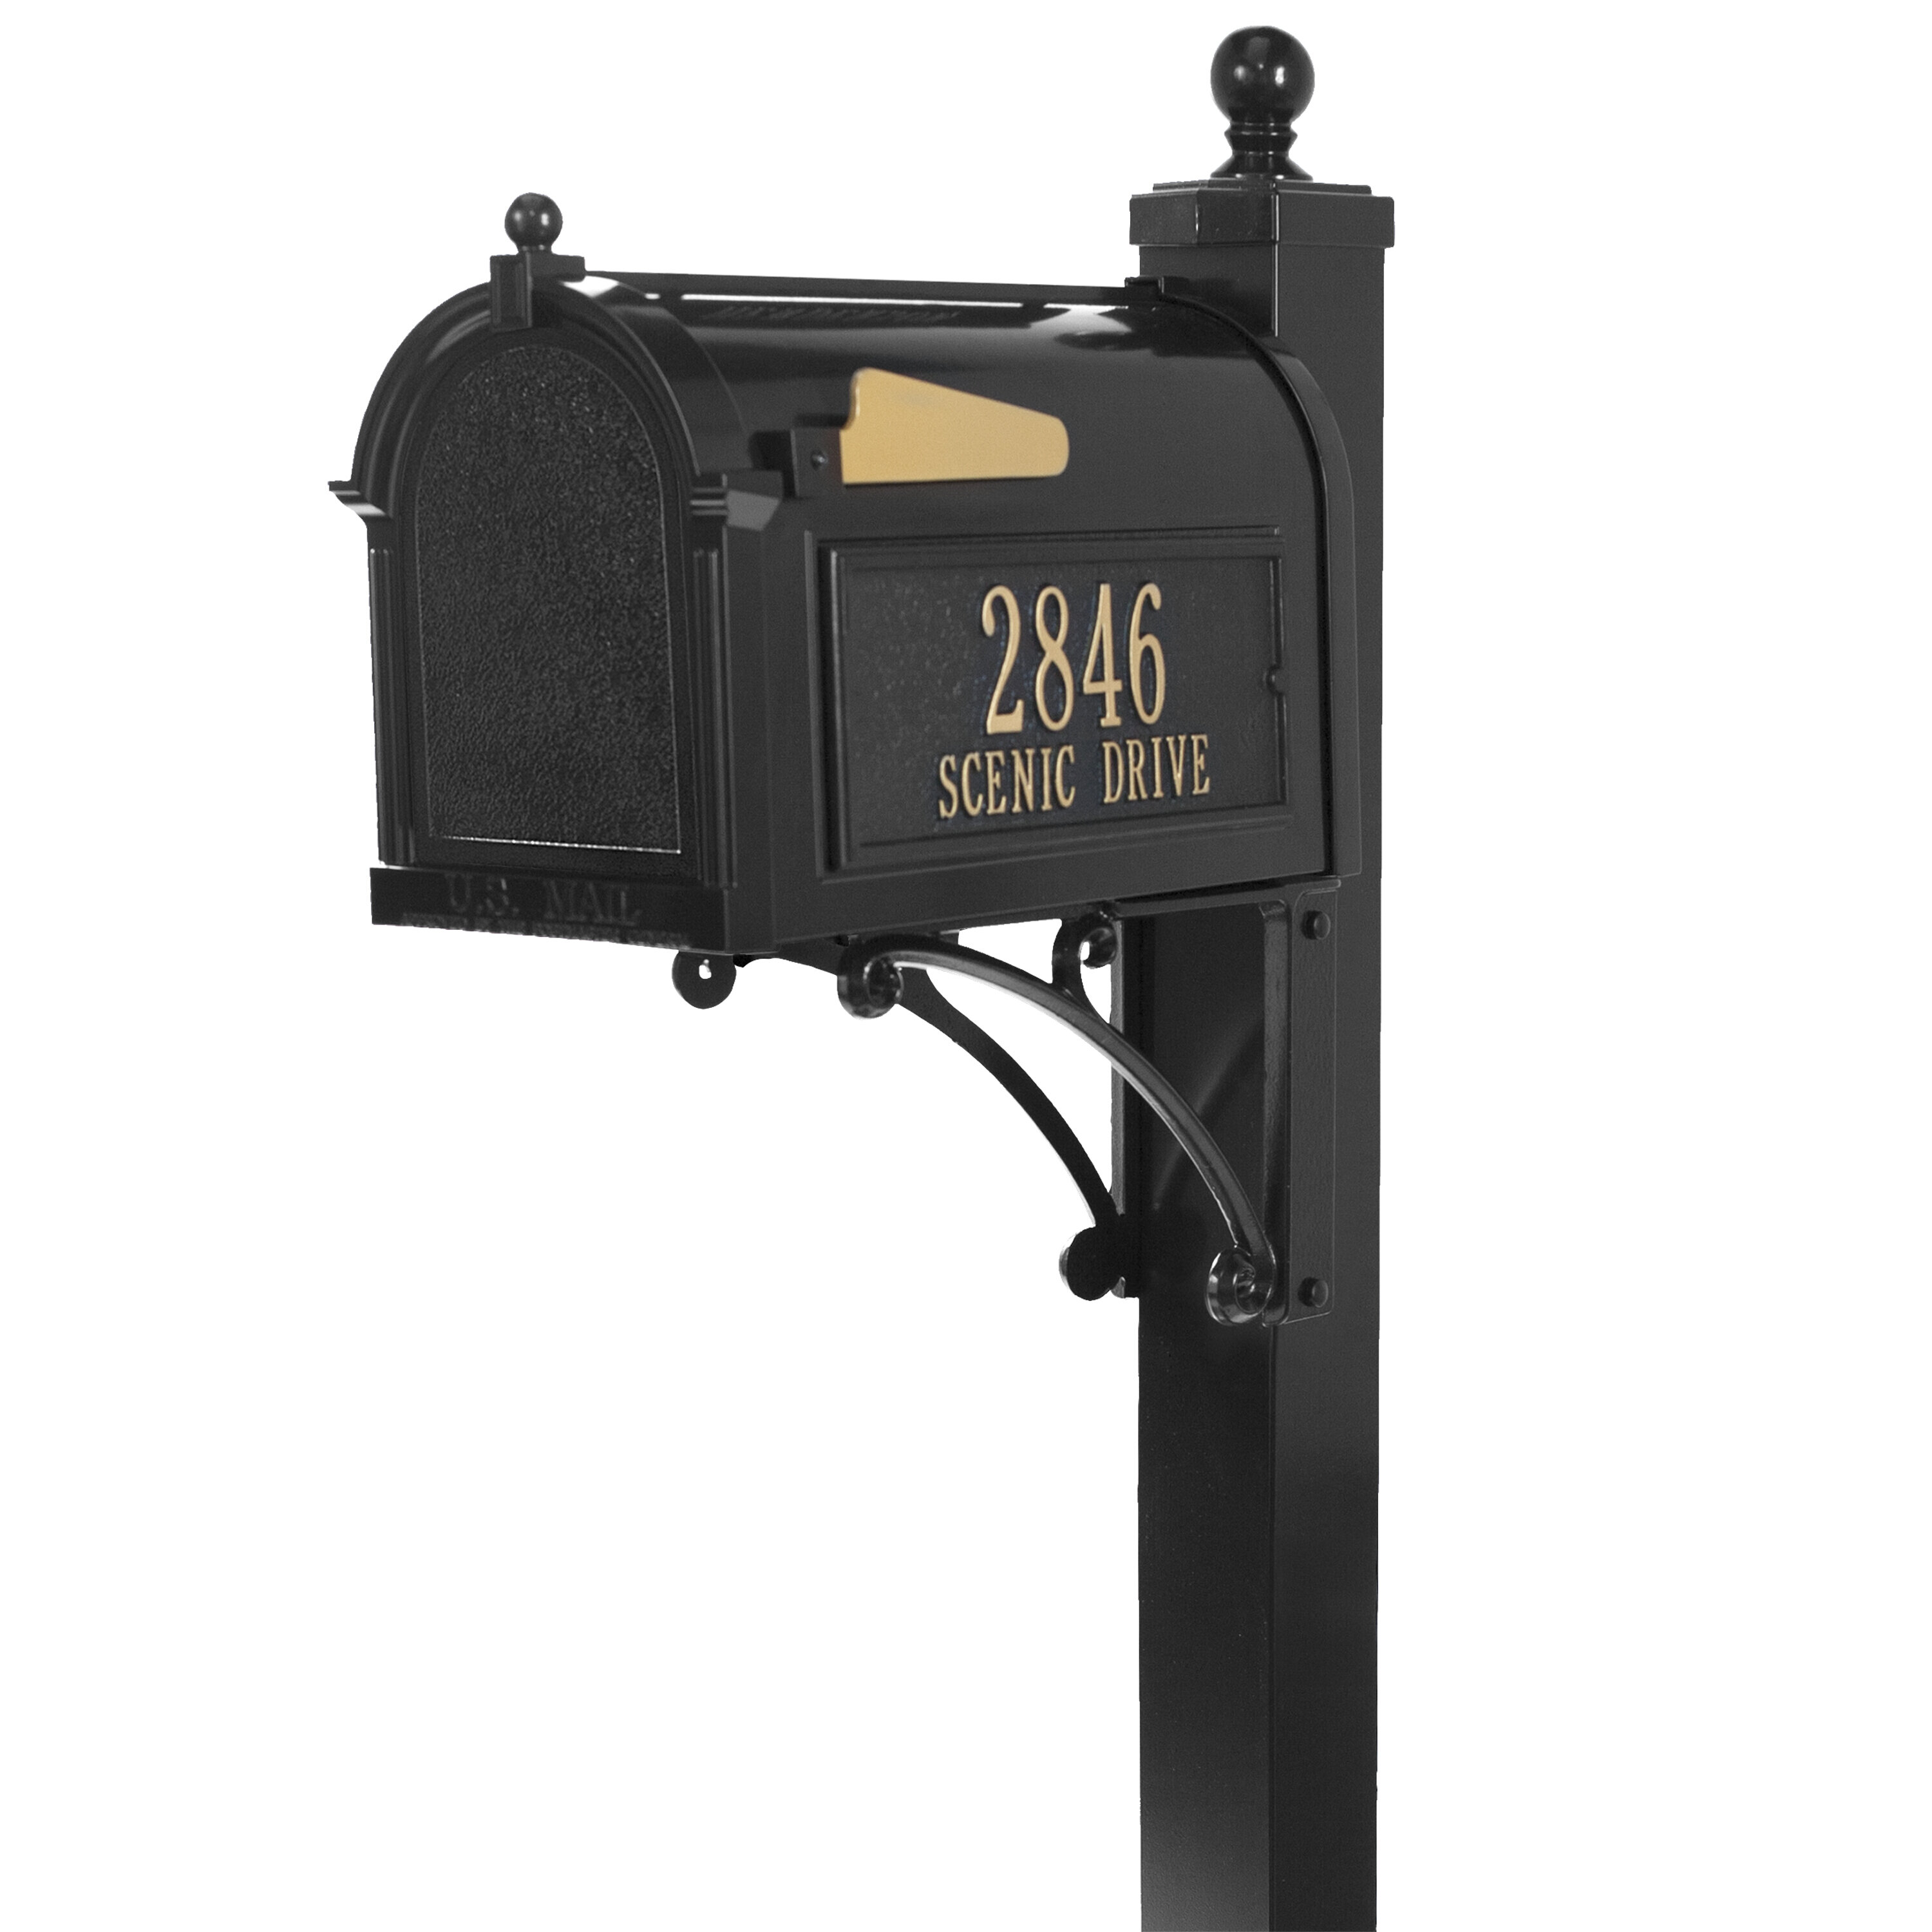 Deluxe Package Post Mounted Mailbox & Reviews | Birch Lane